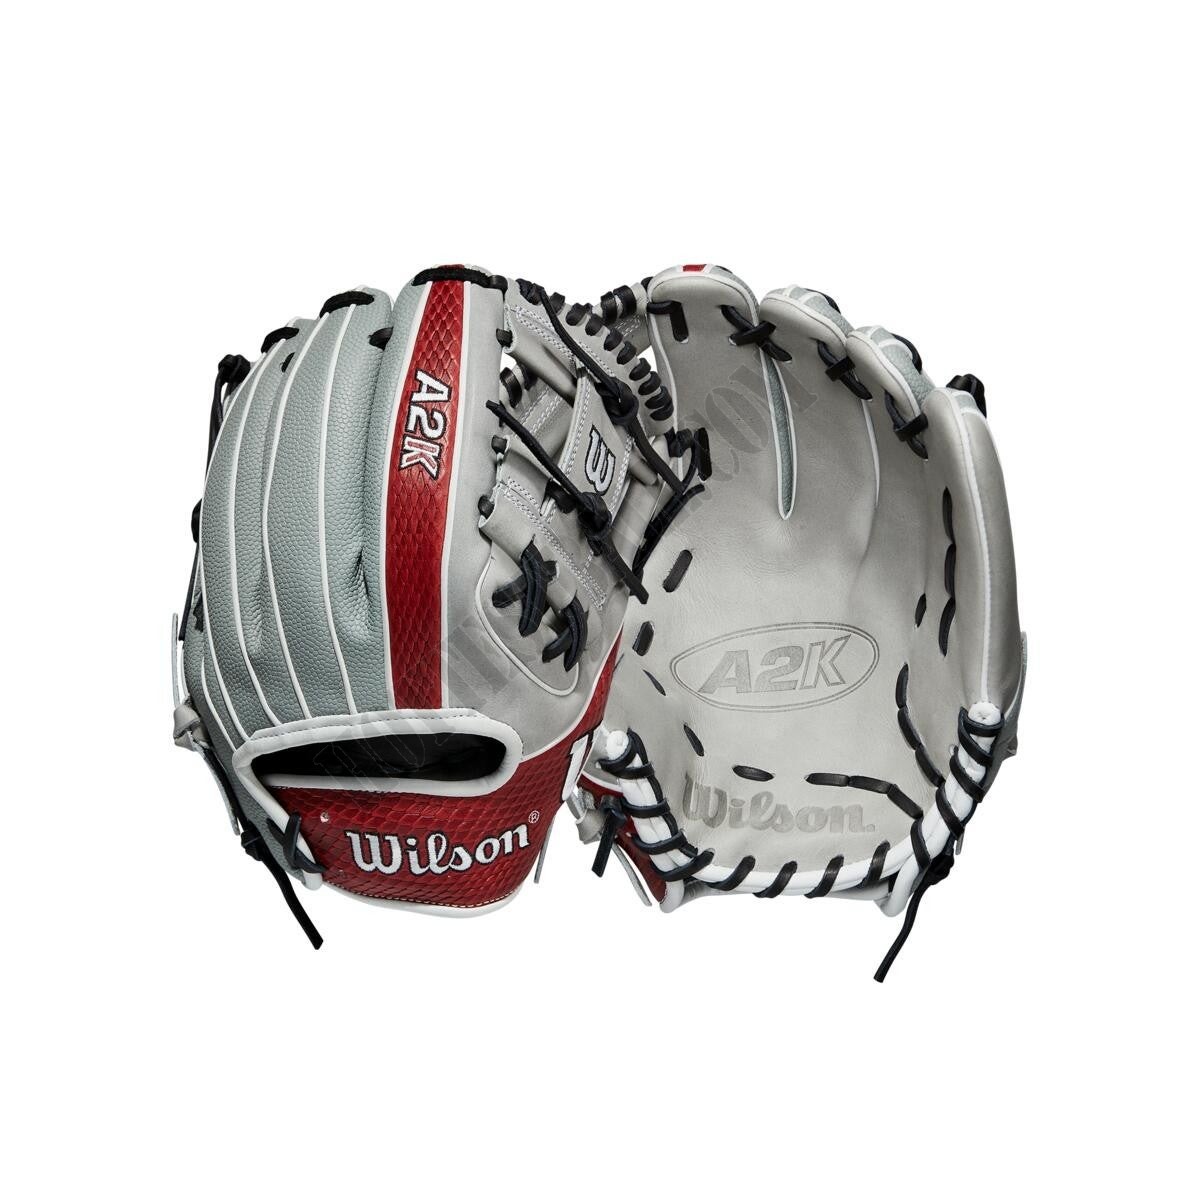 2021 A2K 1786SS 11.5" Infield Baseball Glove - Limited Edition ● Wilson Promotions - -0